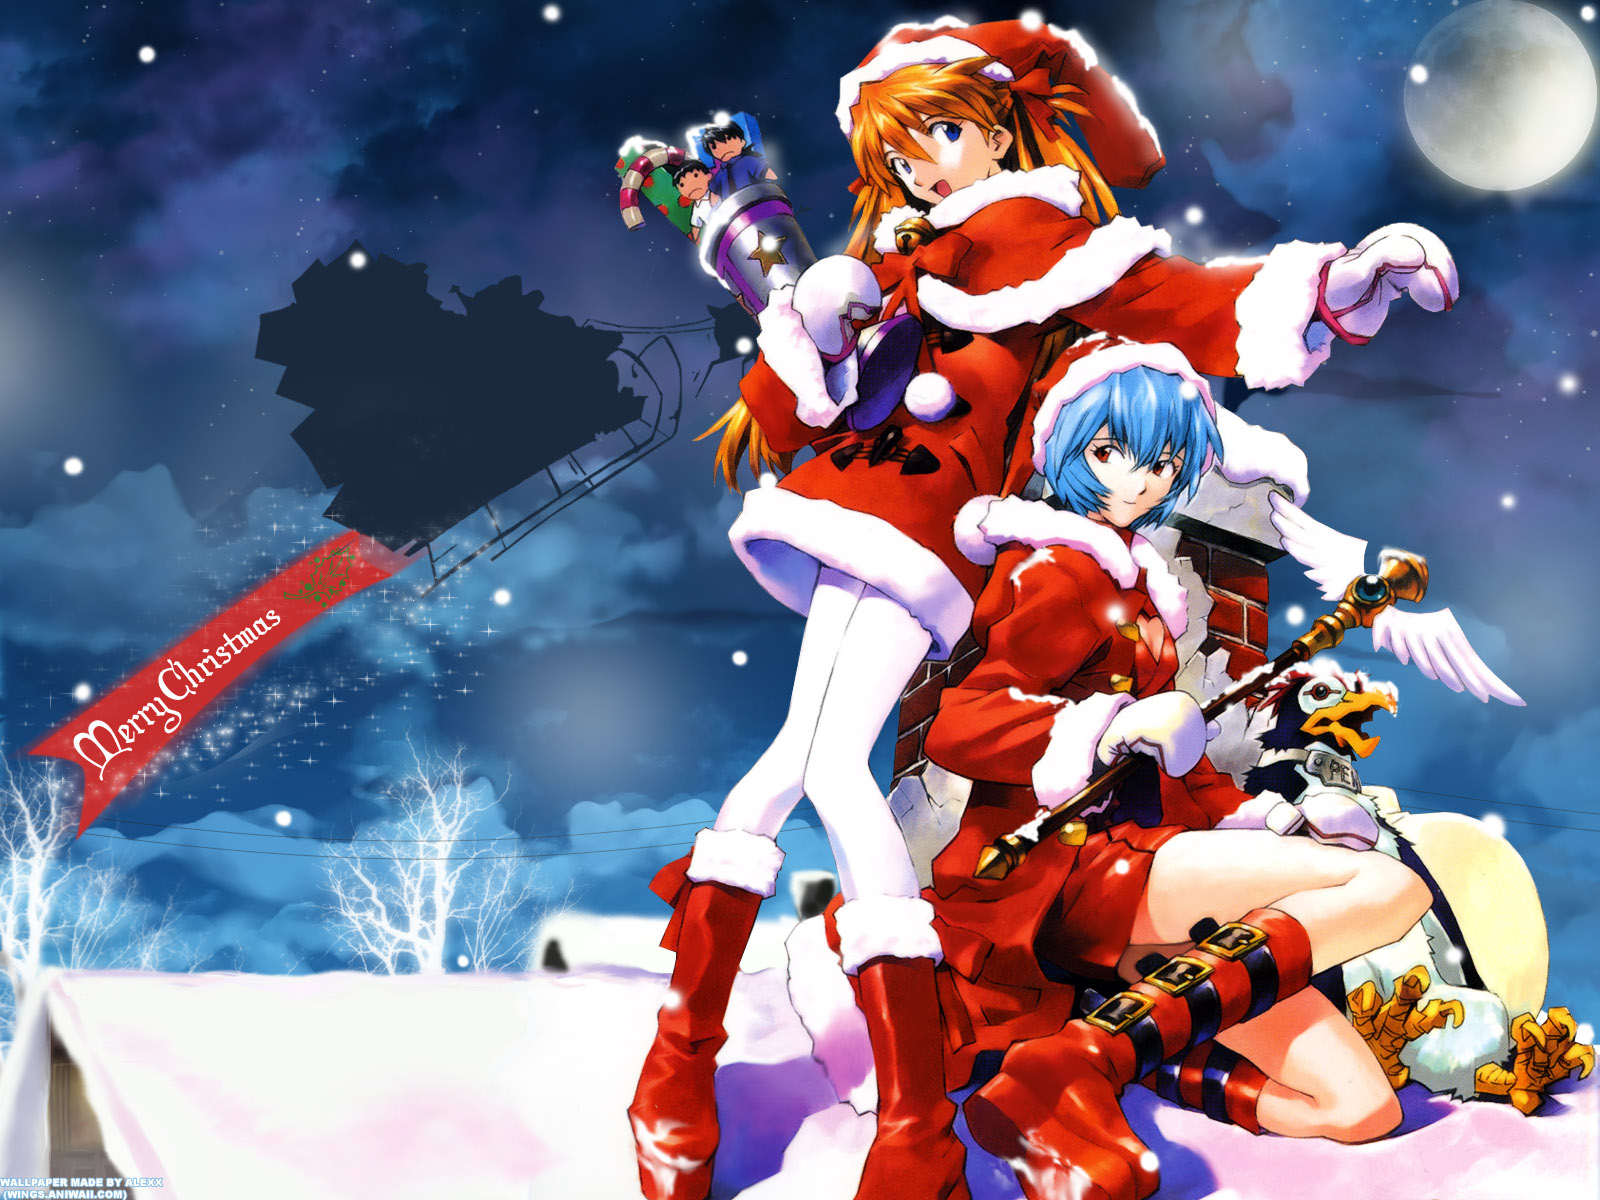 Merry Christmas Wallpaper Anime on Review Manga Review Merry Chrstmas Anime Wallpaper Other News